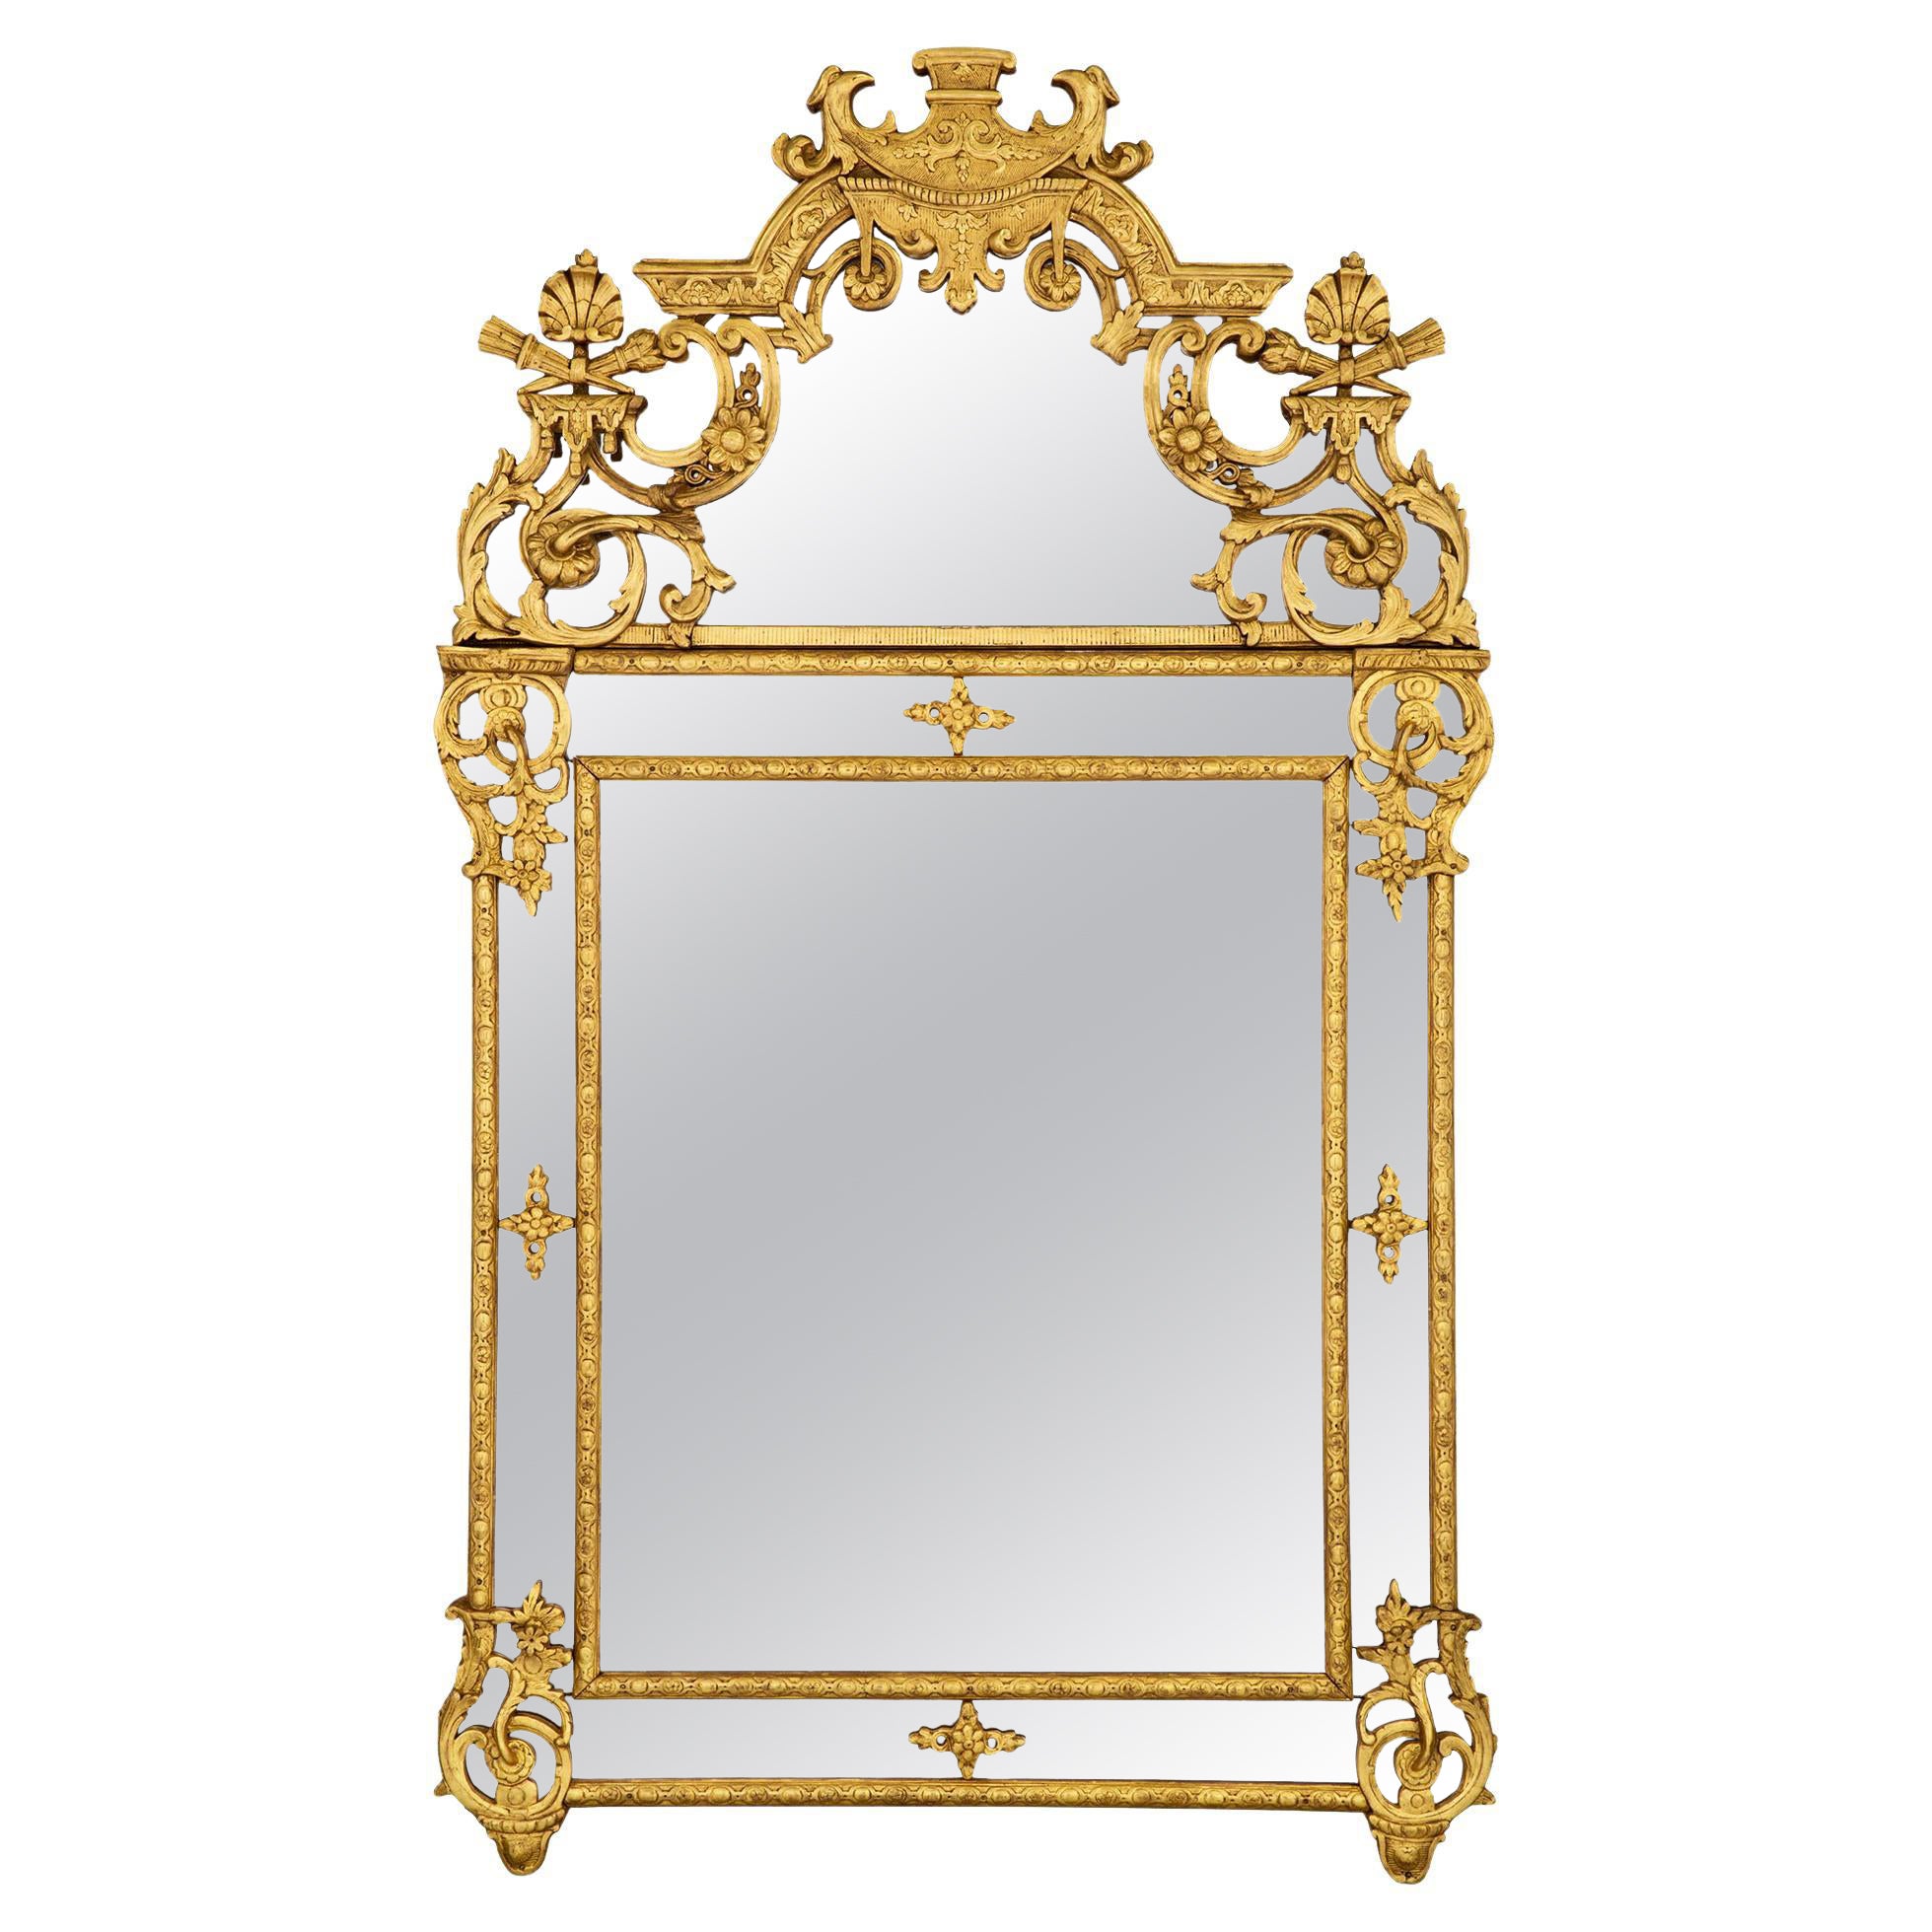 French 18th Century Regence Period Double Framed Giltwood Mirror For Sale